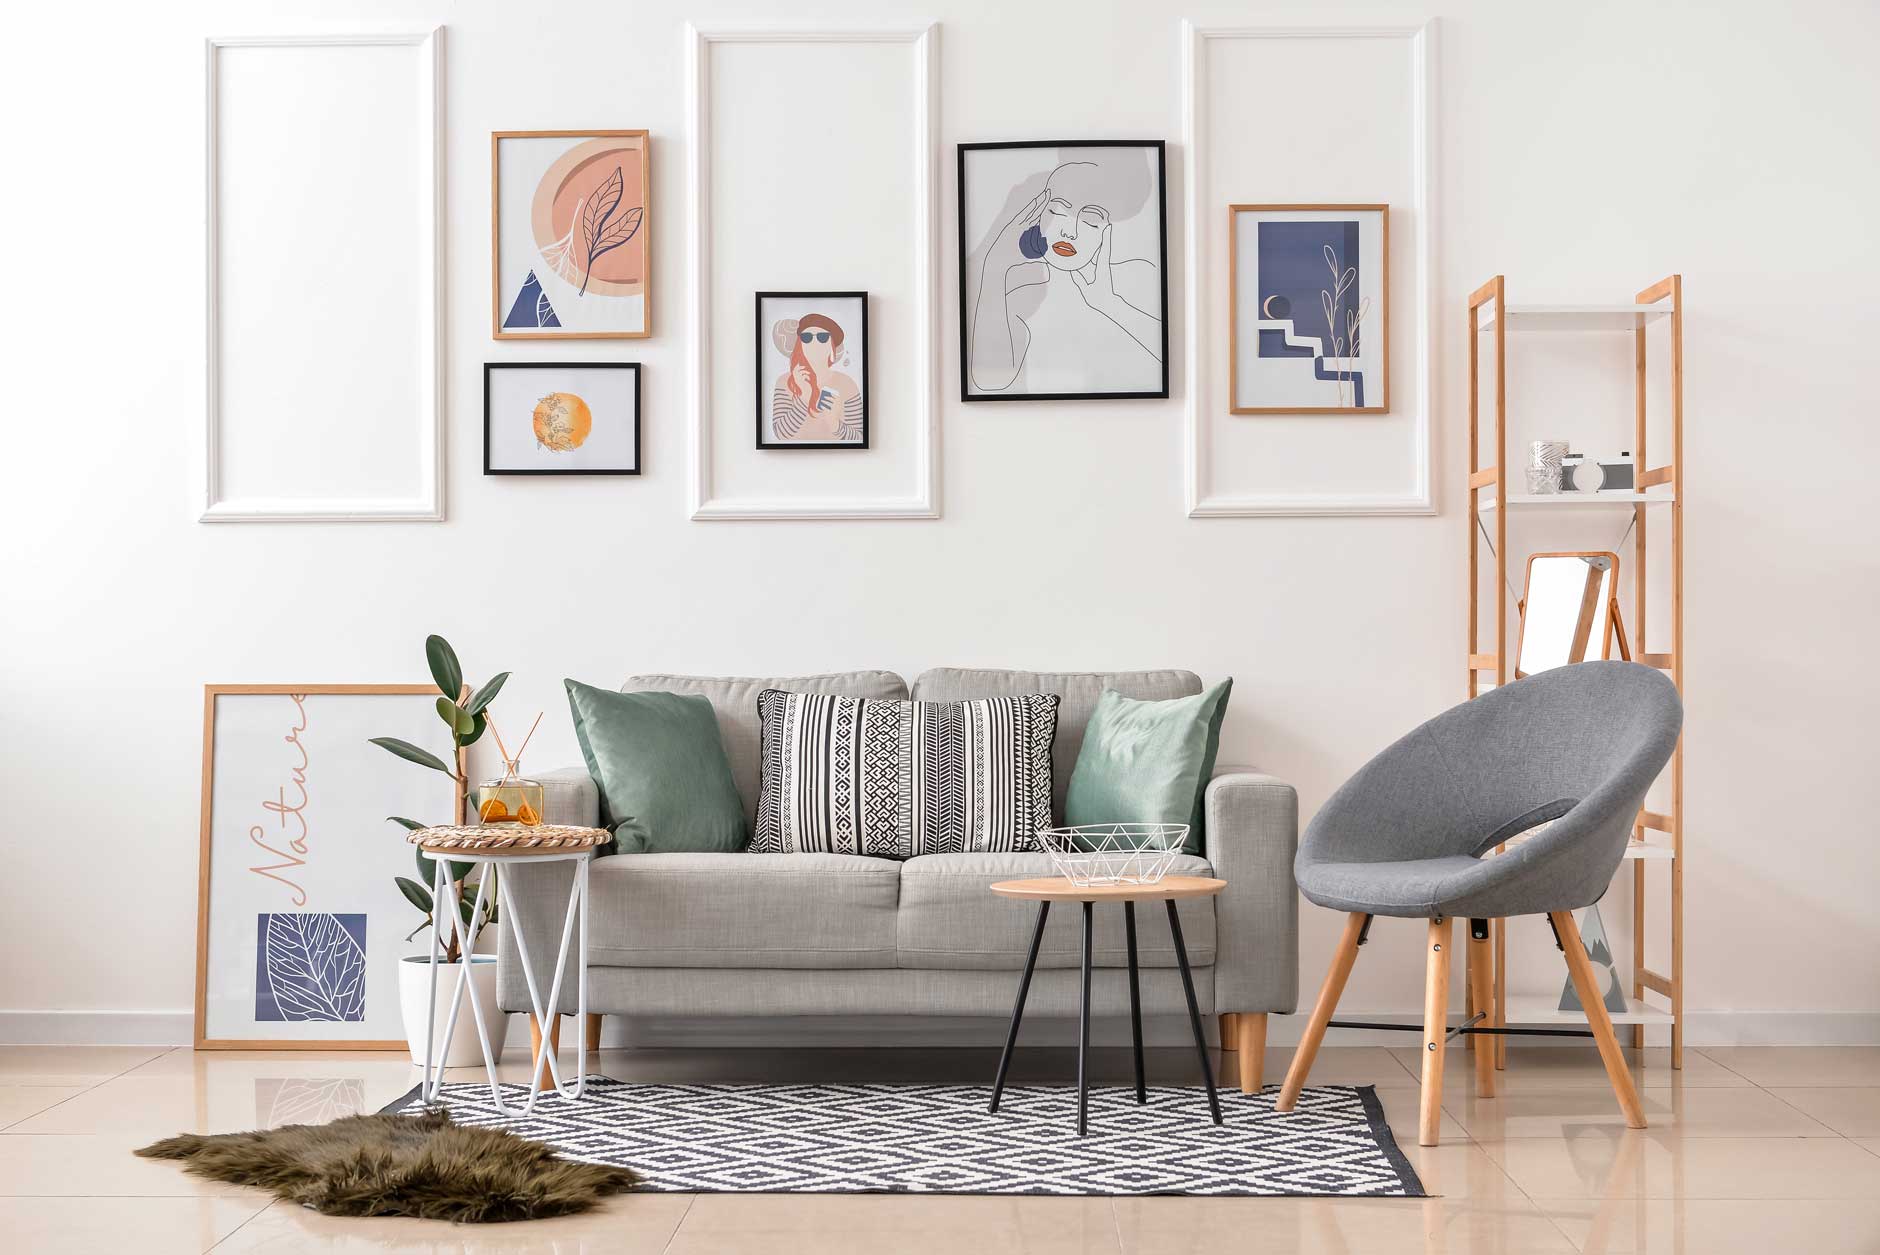 5 Wall Art Trends For 2022